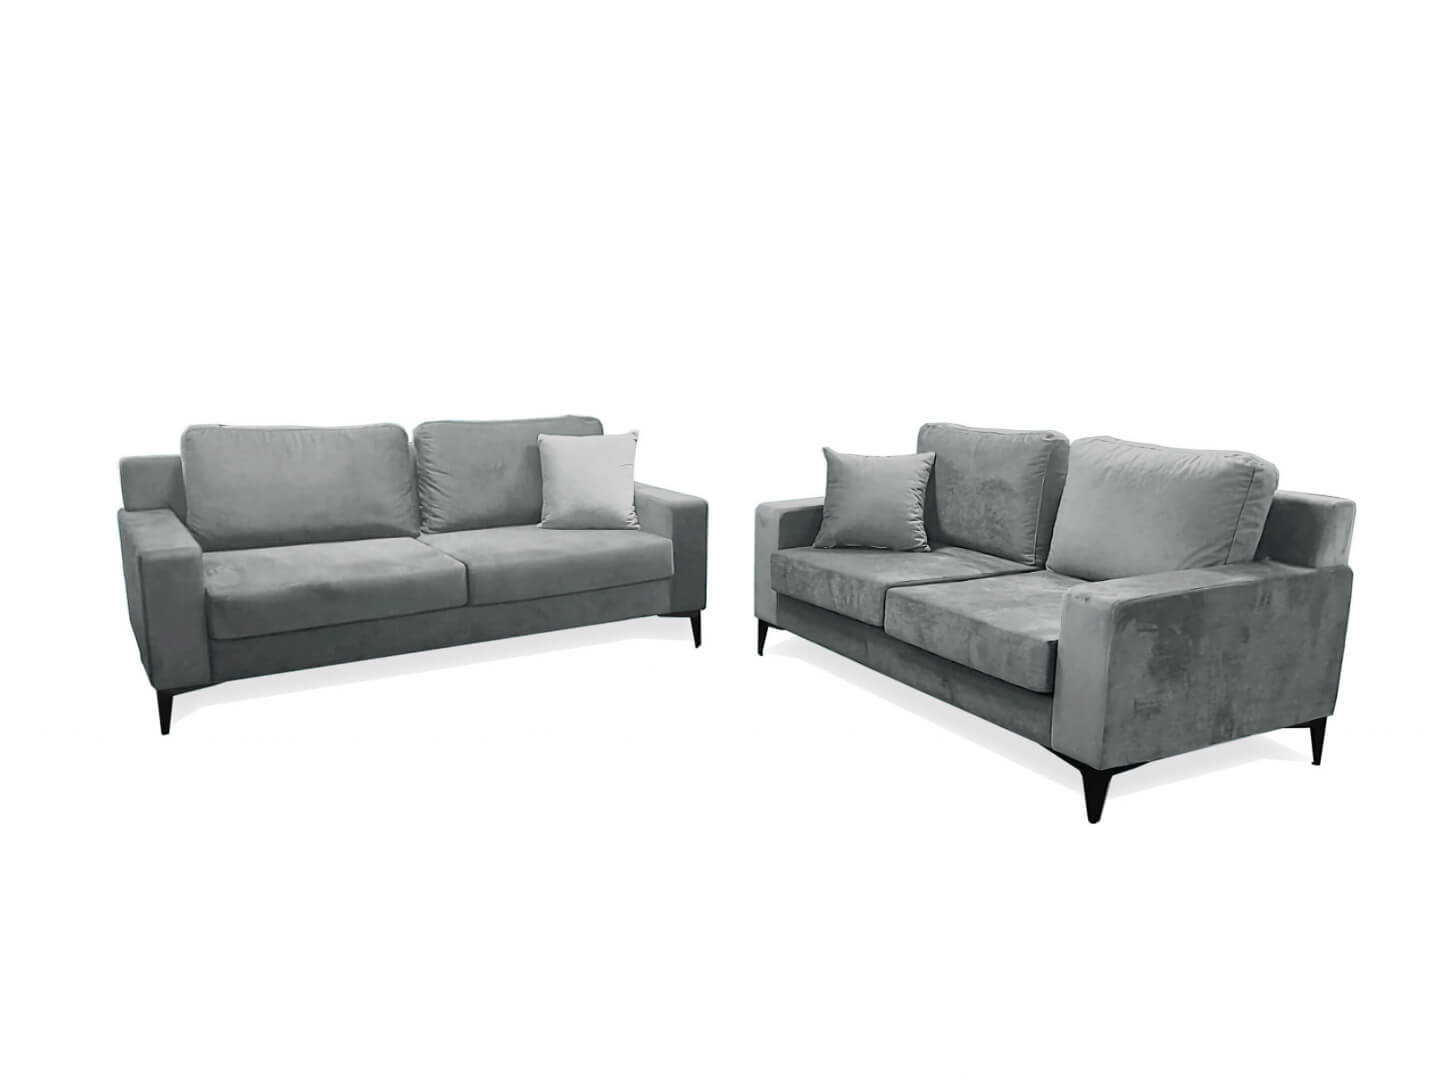 three seater and two seater sofa set, water and stain resistant / Light grey